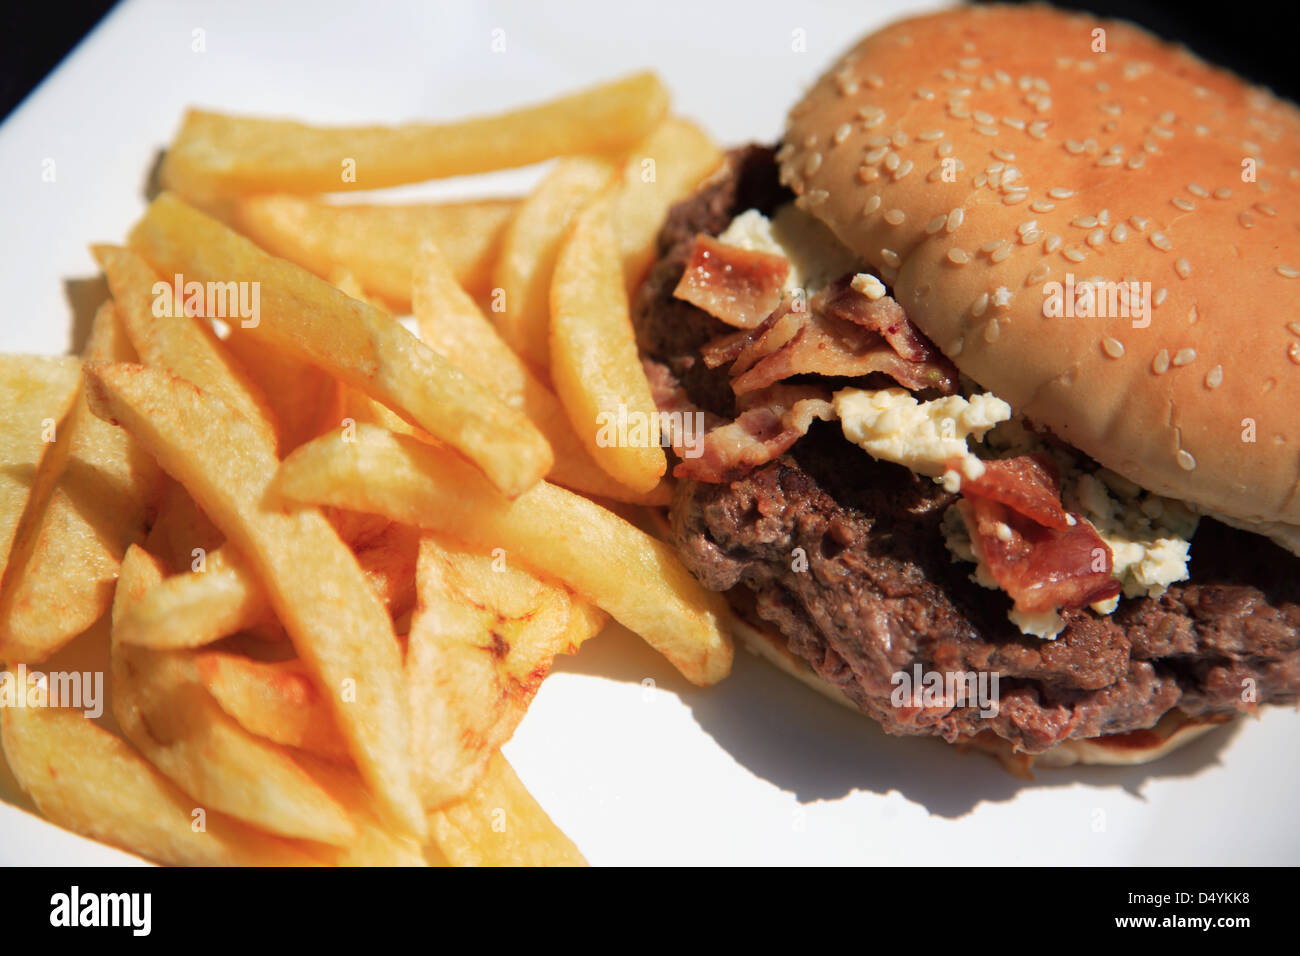 Looking down on a juicy beef burger and fries Stock Photo